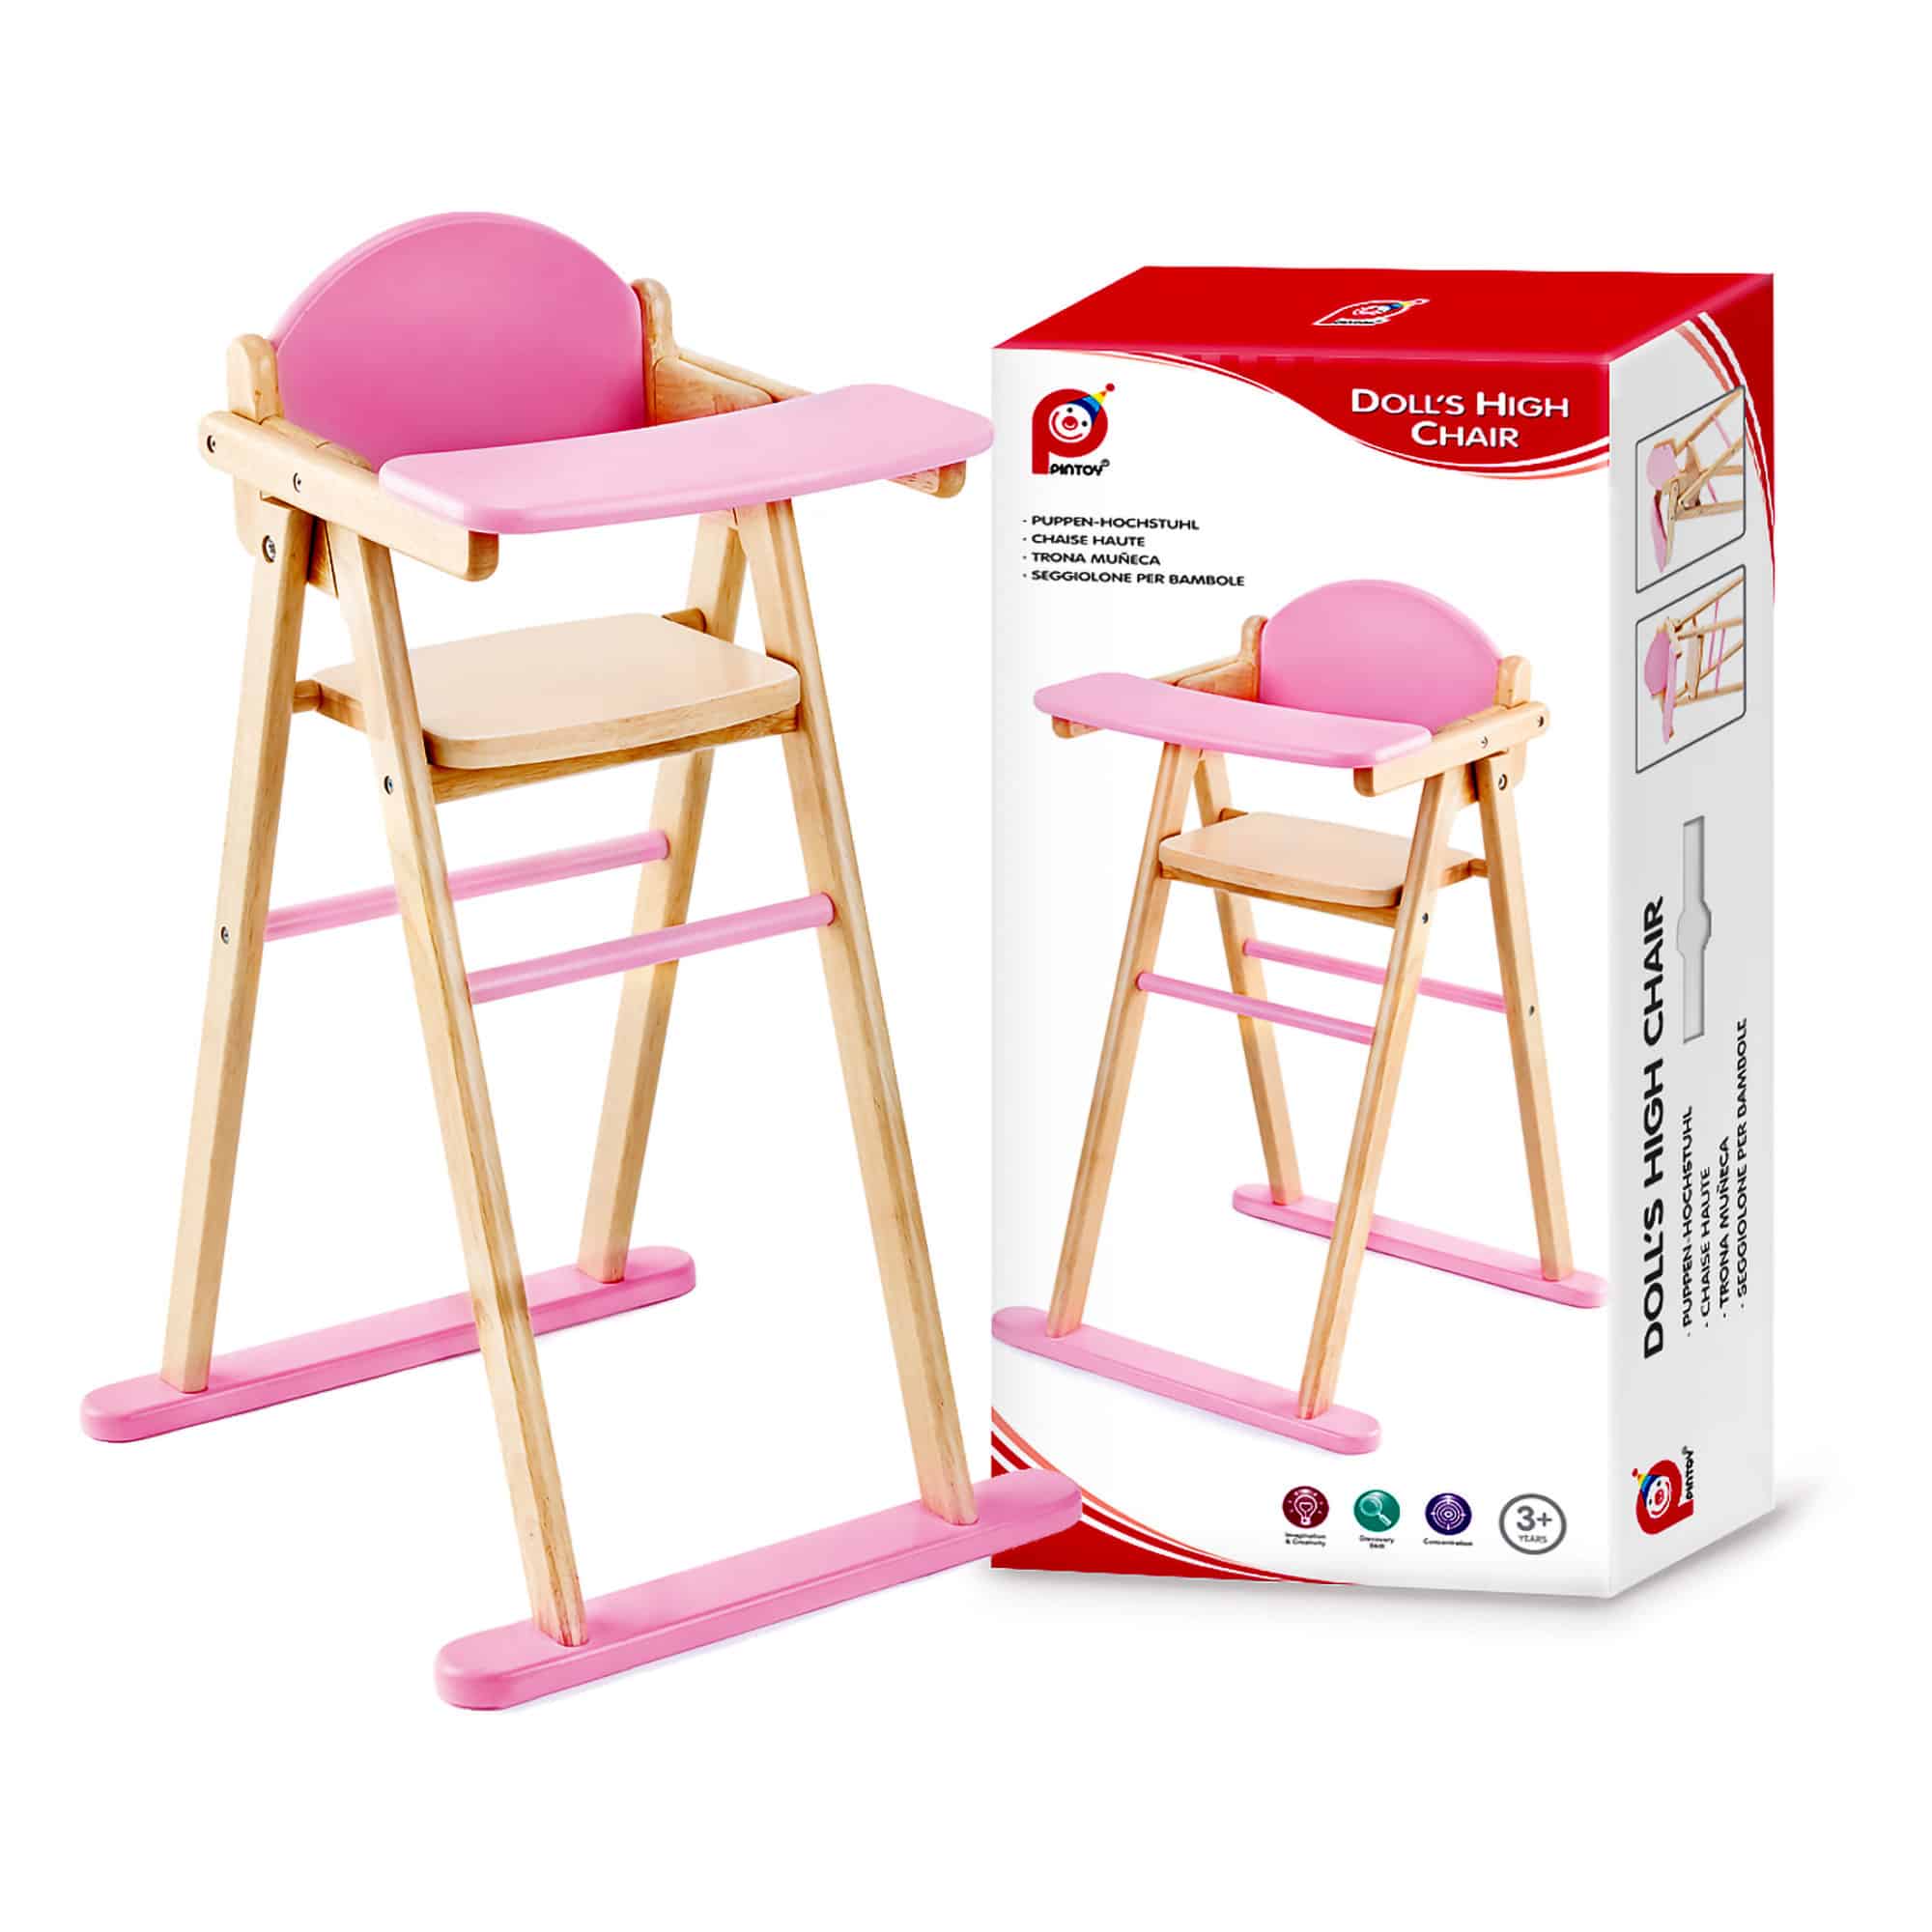 Pintoy-wooden Doll high chair